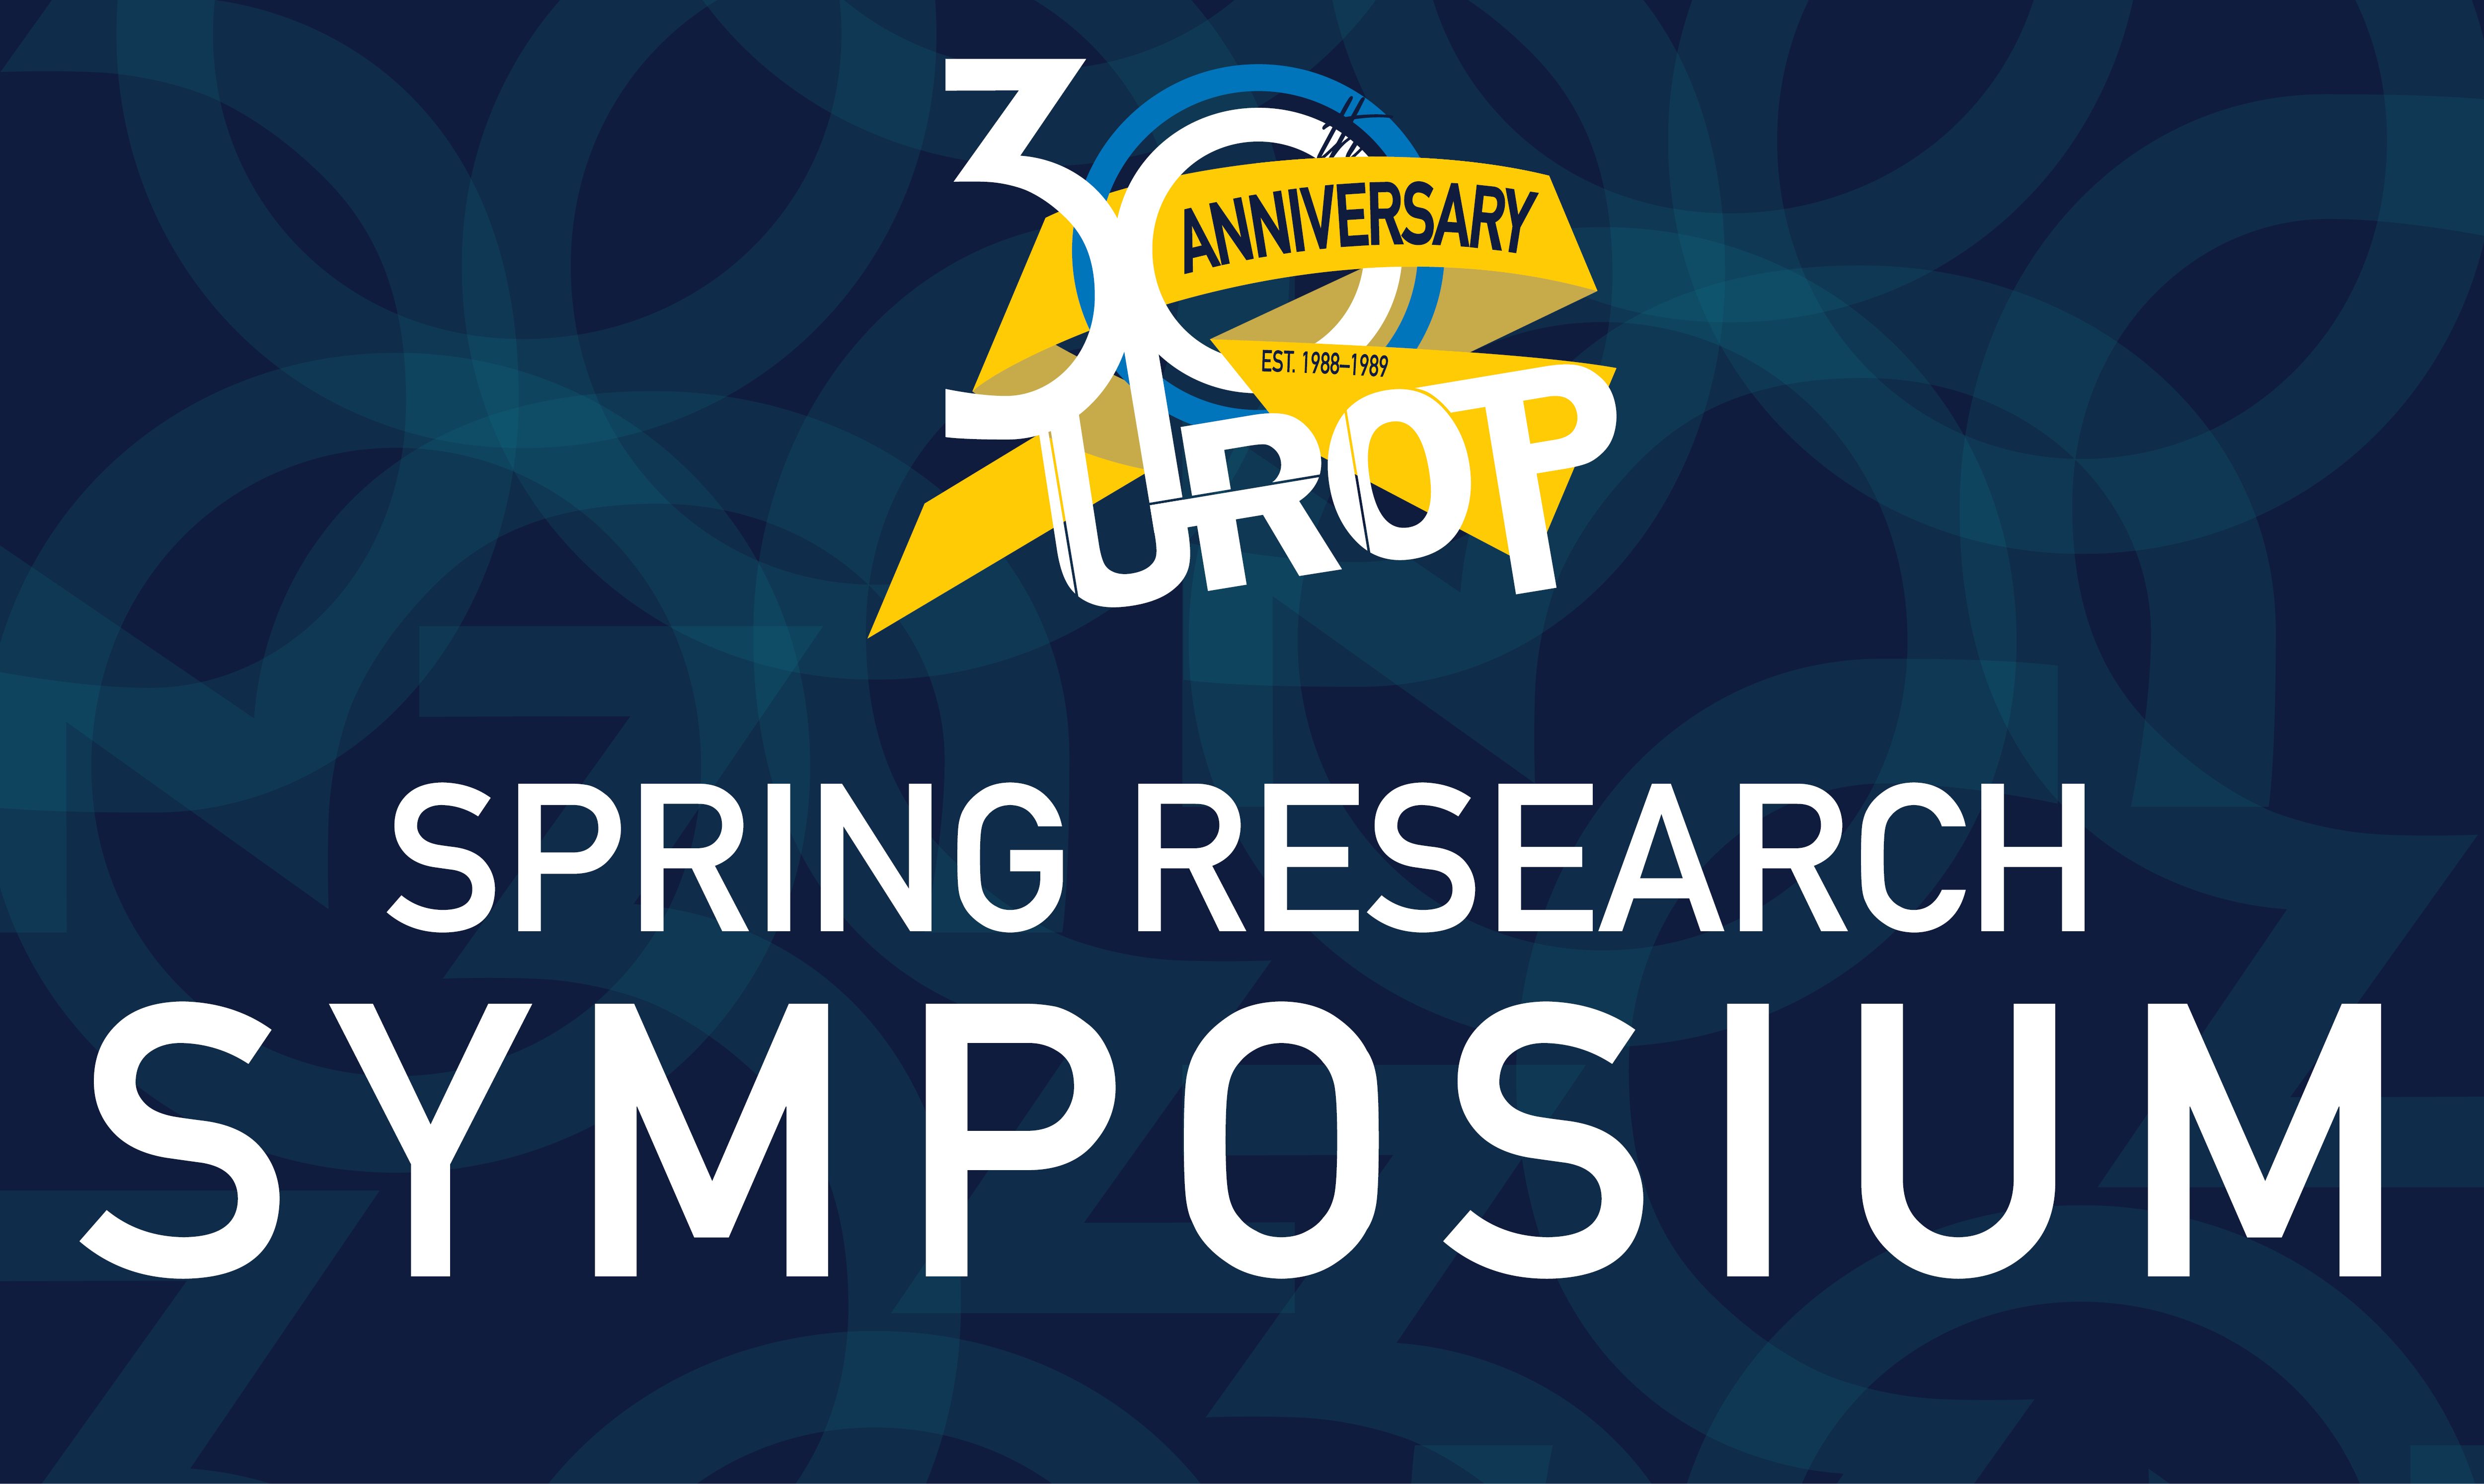 30th Anniversary Spring Research Symposium